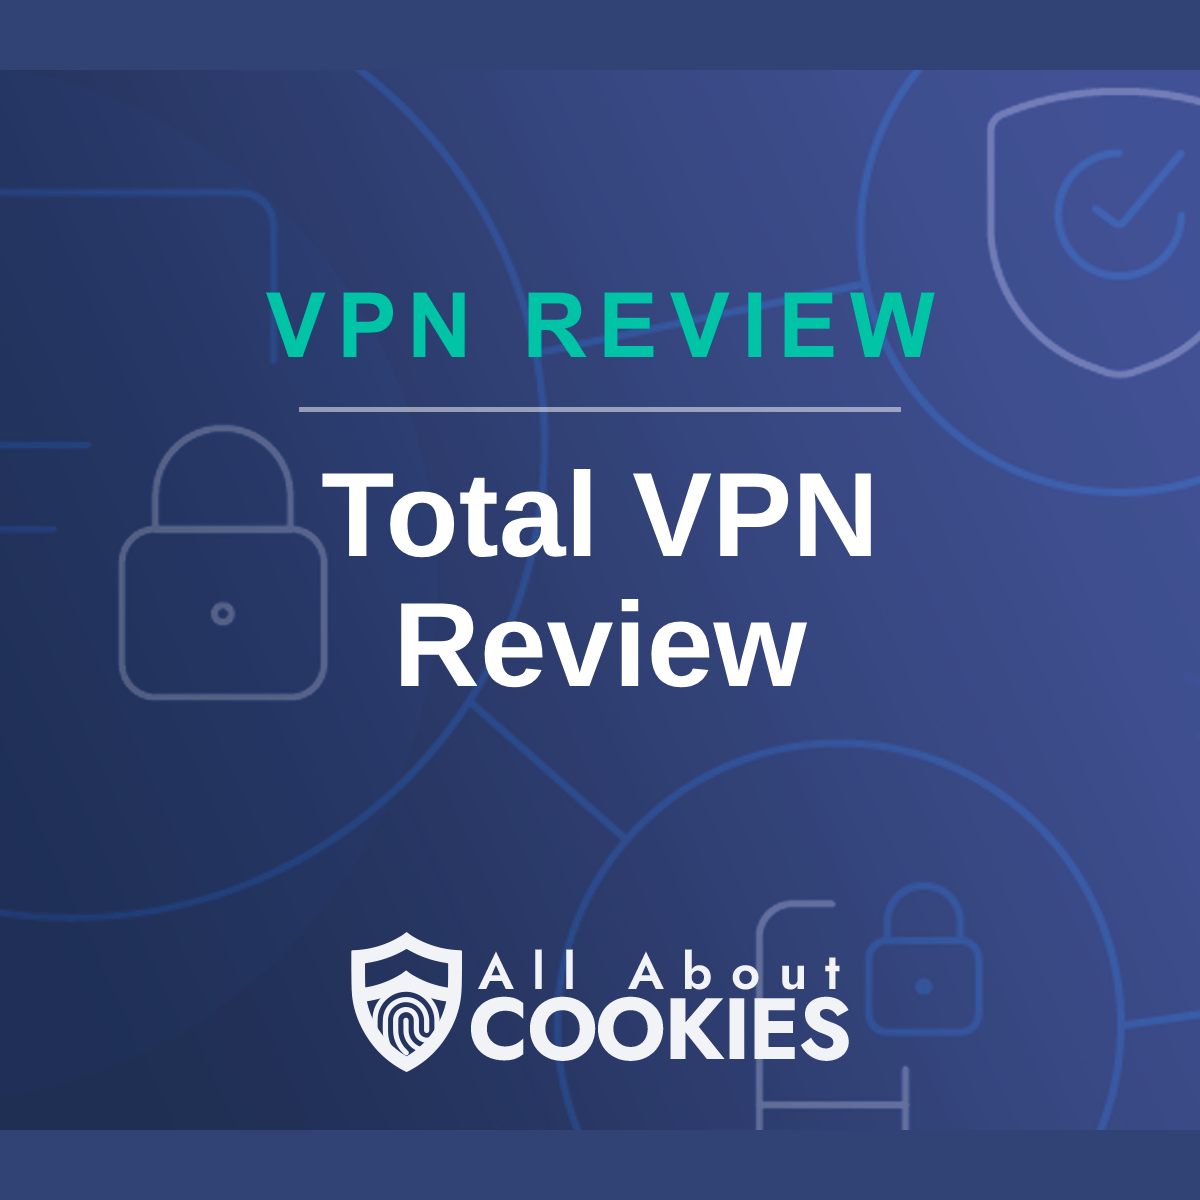 A blue background with images of locks and shields with the text &quot;Total VPN Review&quot; and the All About Cookies logo. 